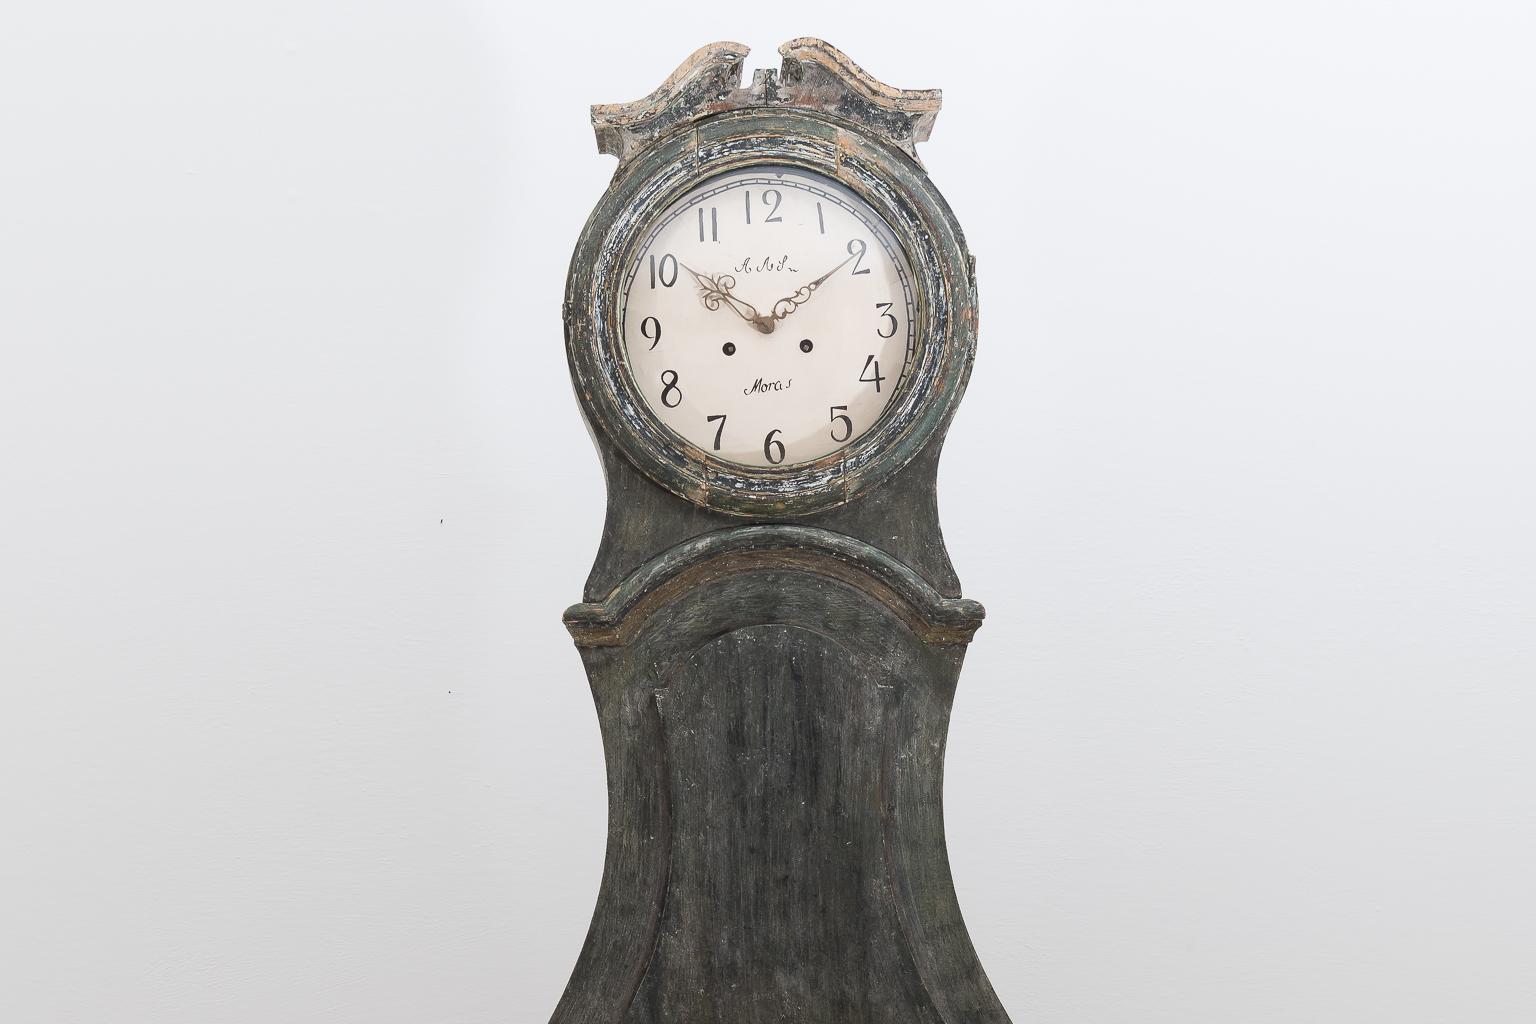 Unusually small Mora clock that has been dry scraped to original paint. Manufactured in Mälardalen, Sweden, circa 1820.

The clock comes with the original clockwork, two iron weights and pendulum. The clockwork has not been serviced and is sold as